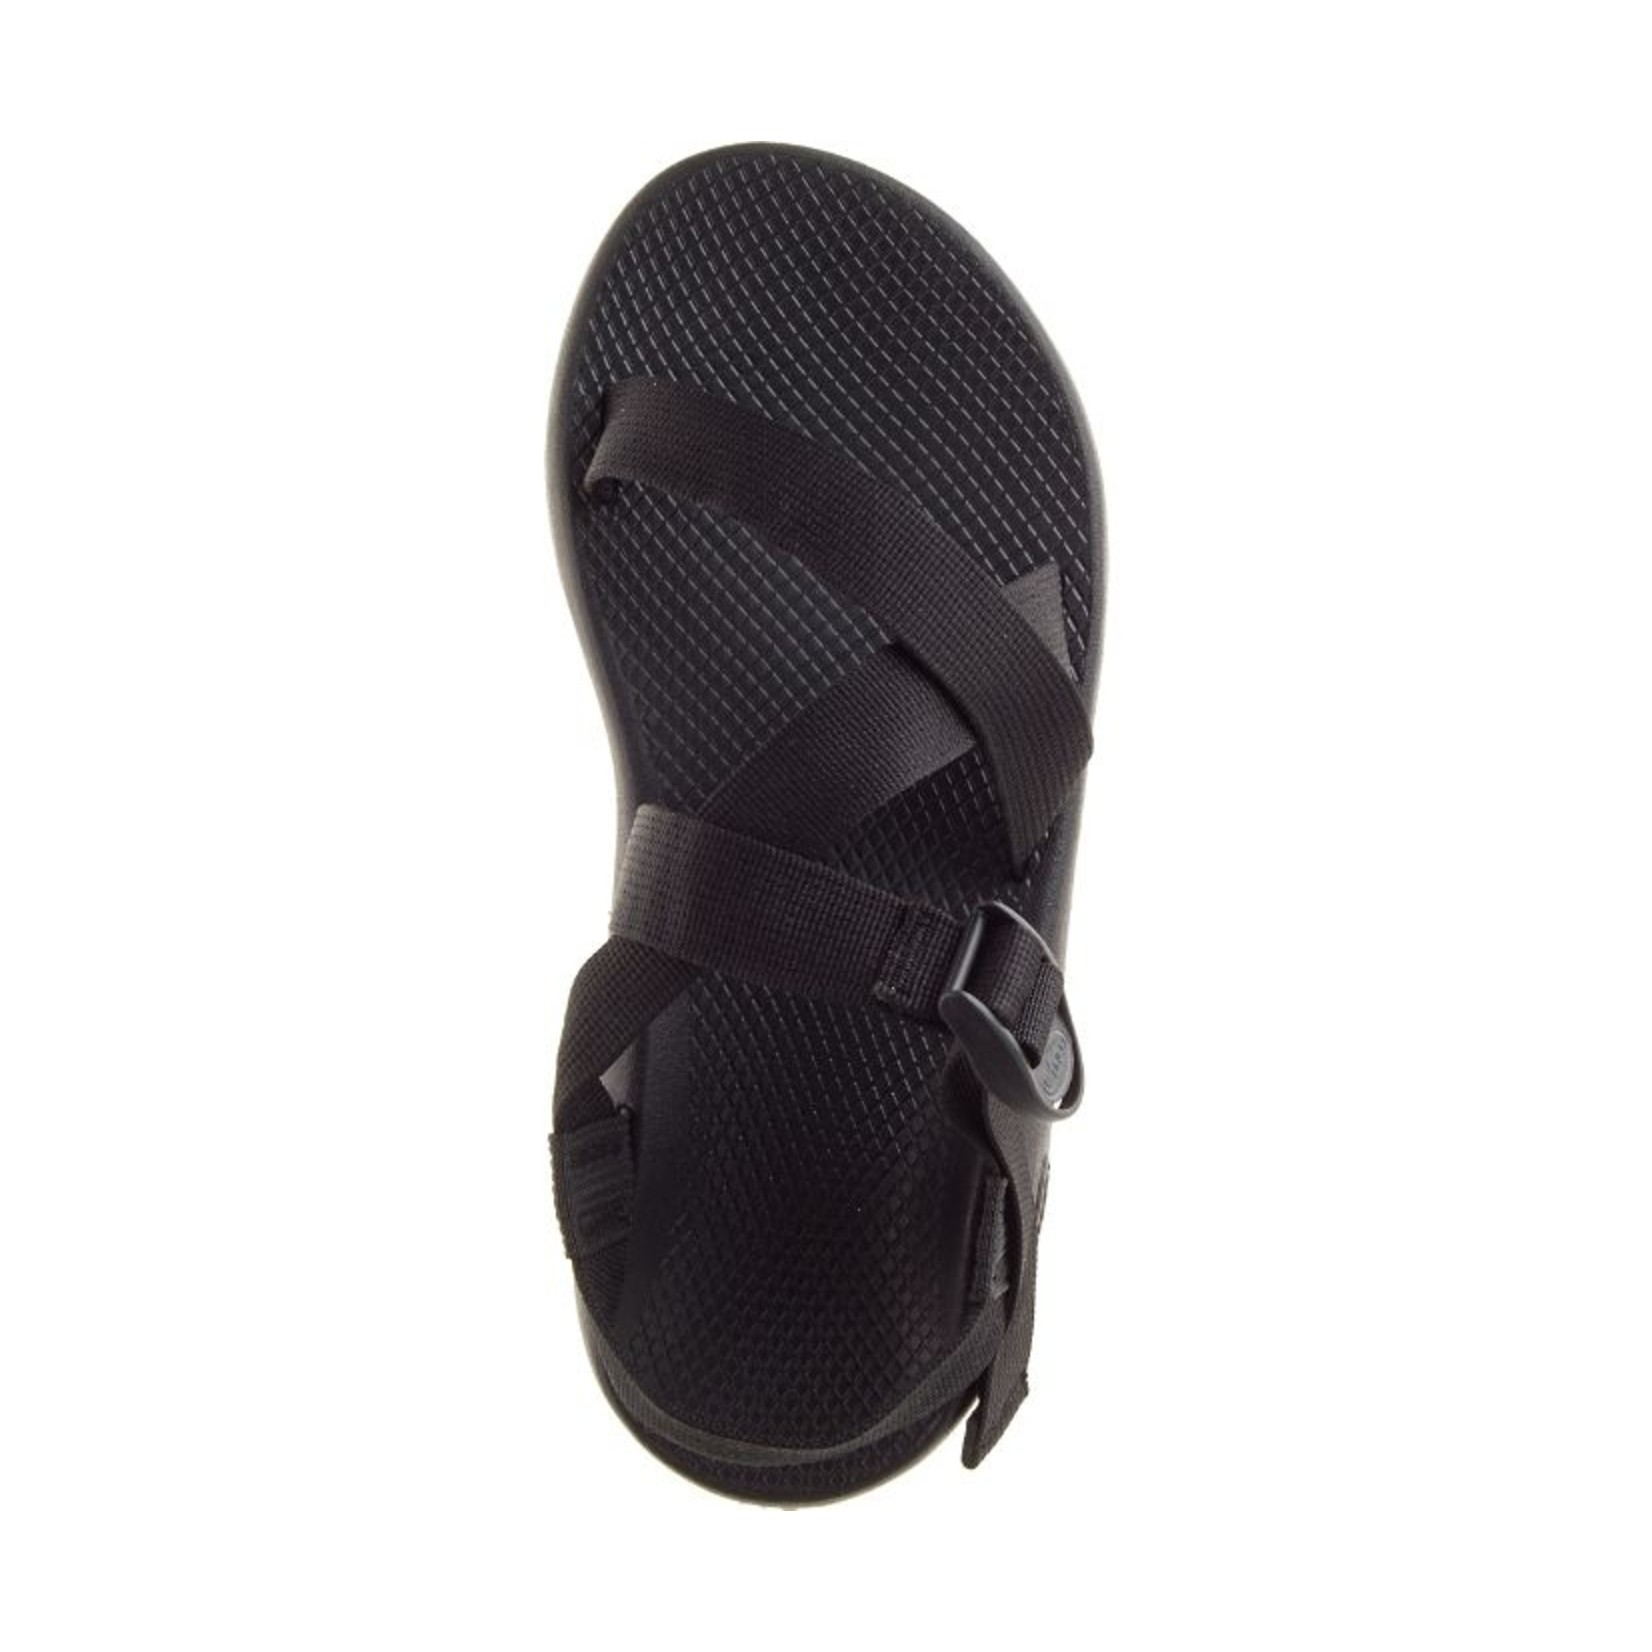 Chaco Chaco Men's Z/1 Classic Sandals